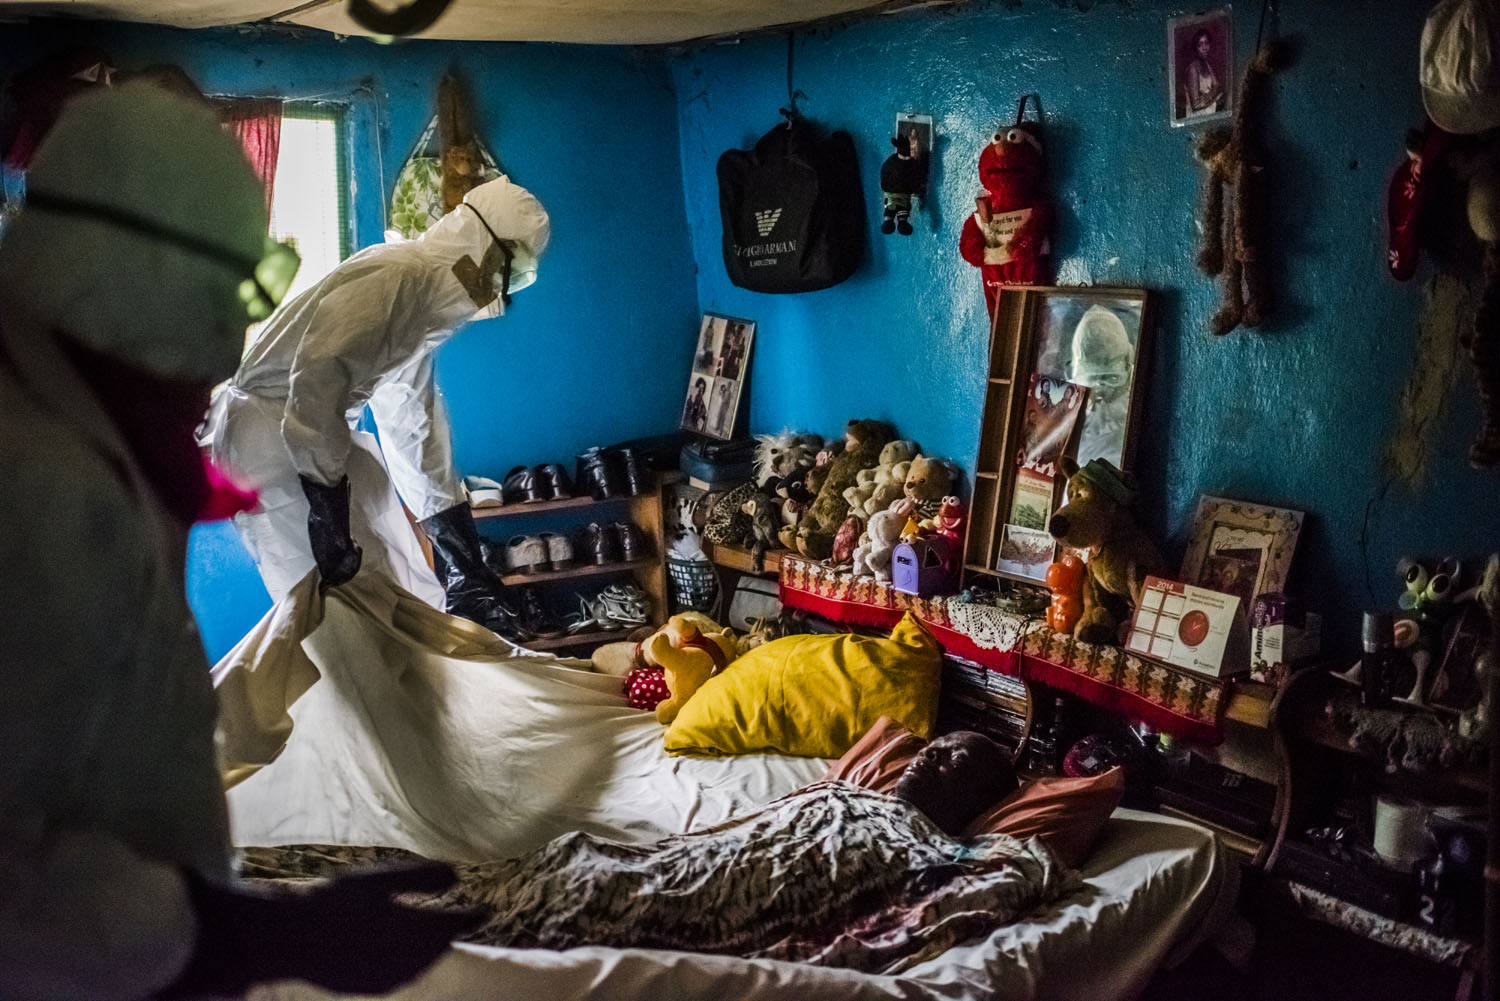 Members of a burial team from the Liberian Red Cross under contract from the Liberian Ministry of Health remove the body of a man, a suspected Ebola victim from a home in Matadi on Sept. 17, 2014 in Monrovia, Liberia.